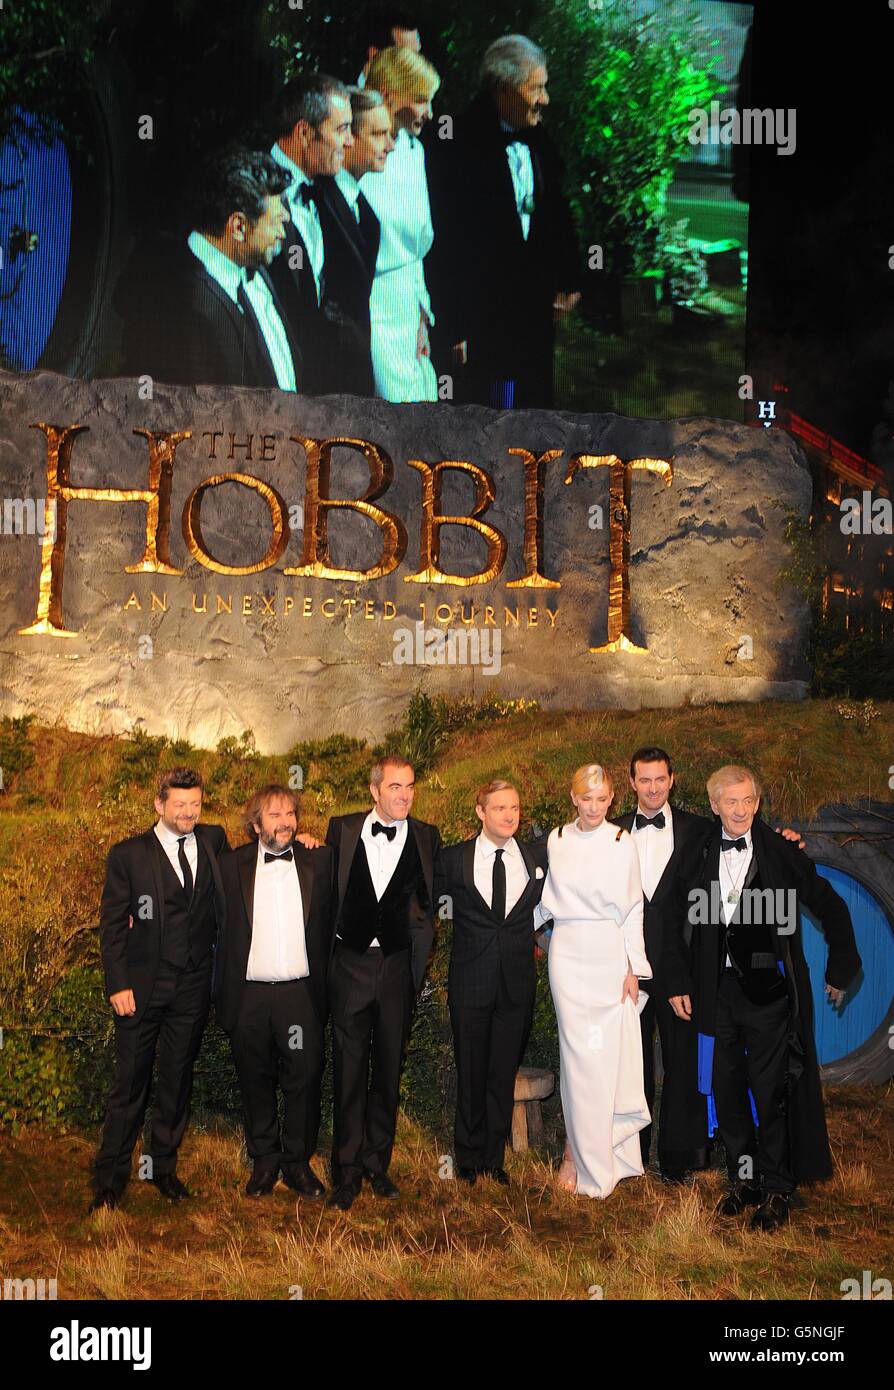 Cast including Cate Blanchett, Sir Ian McKellen, Martin Freeman, James Nesbitt, Andy Serkis and Richard Armitage with Perter Jackson arriving for the UK Premiere of The Hobbit: An Unexpected Journey at the Odeon Leicester Square, London. Stock Photo